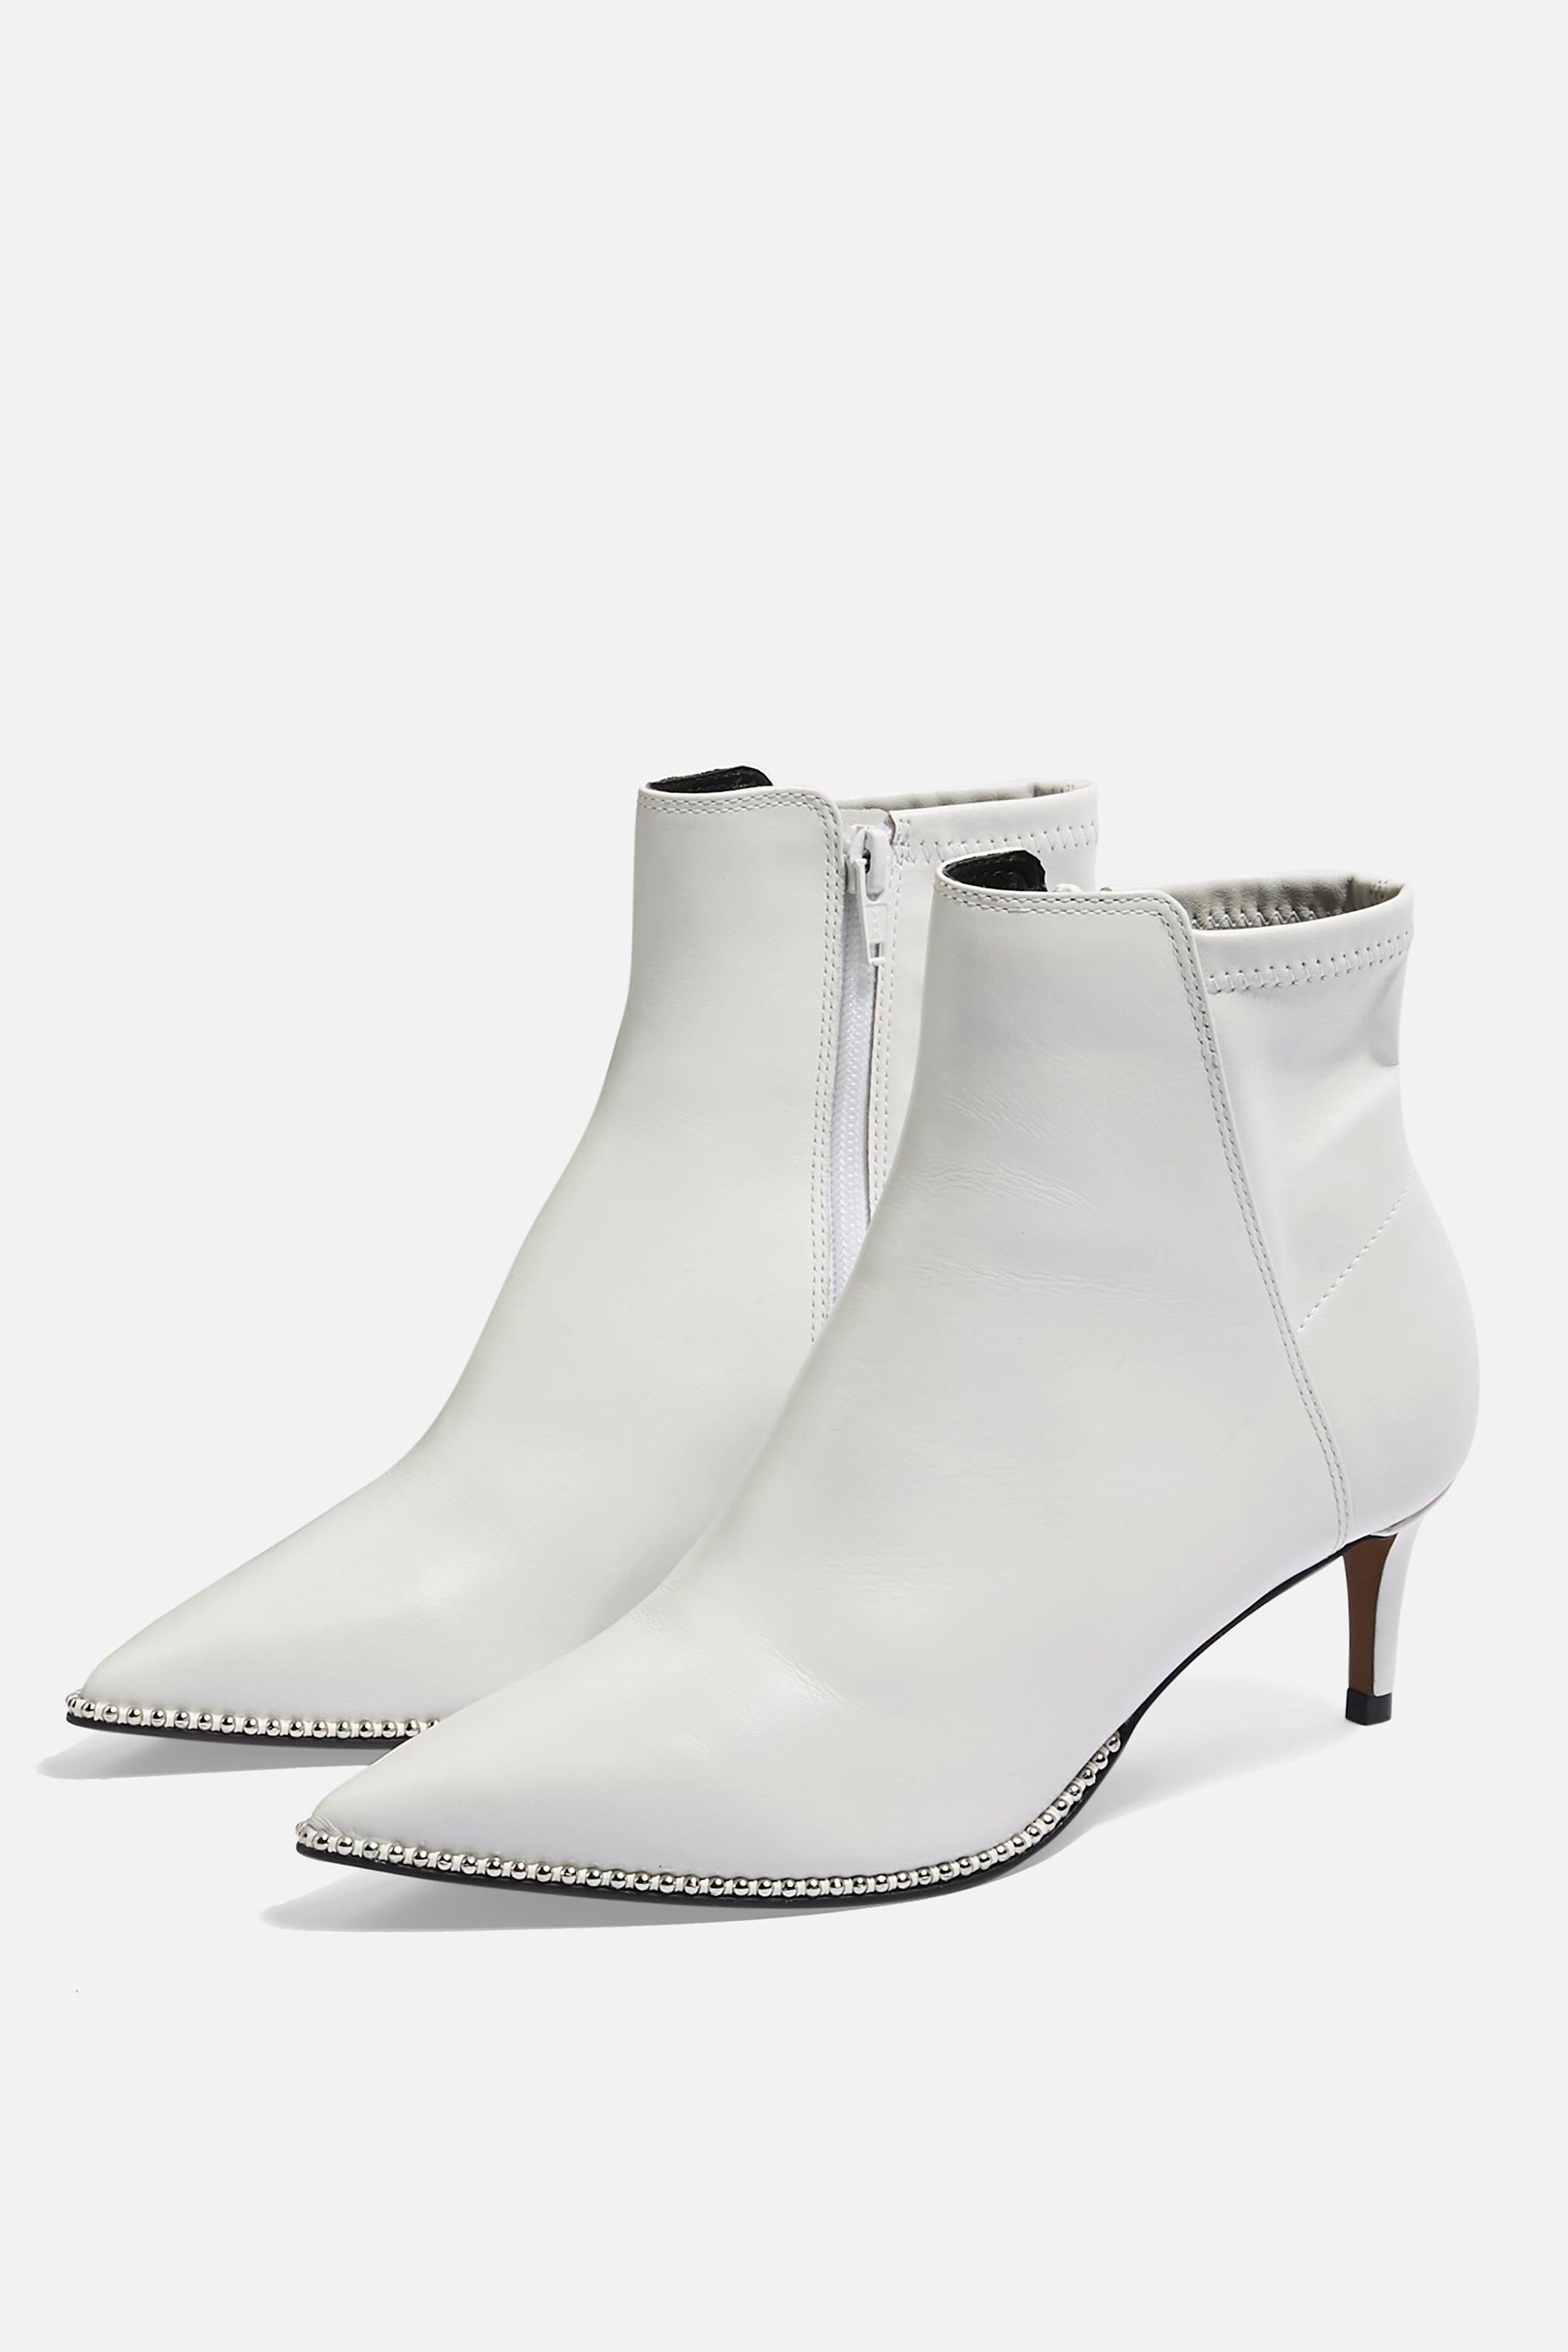 topshop howdie high ankle boots